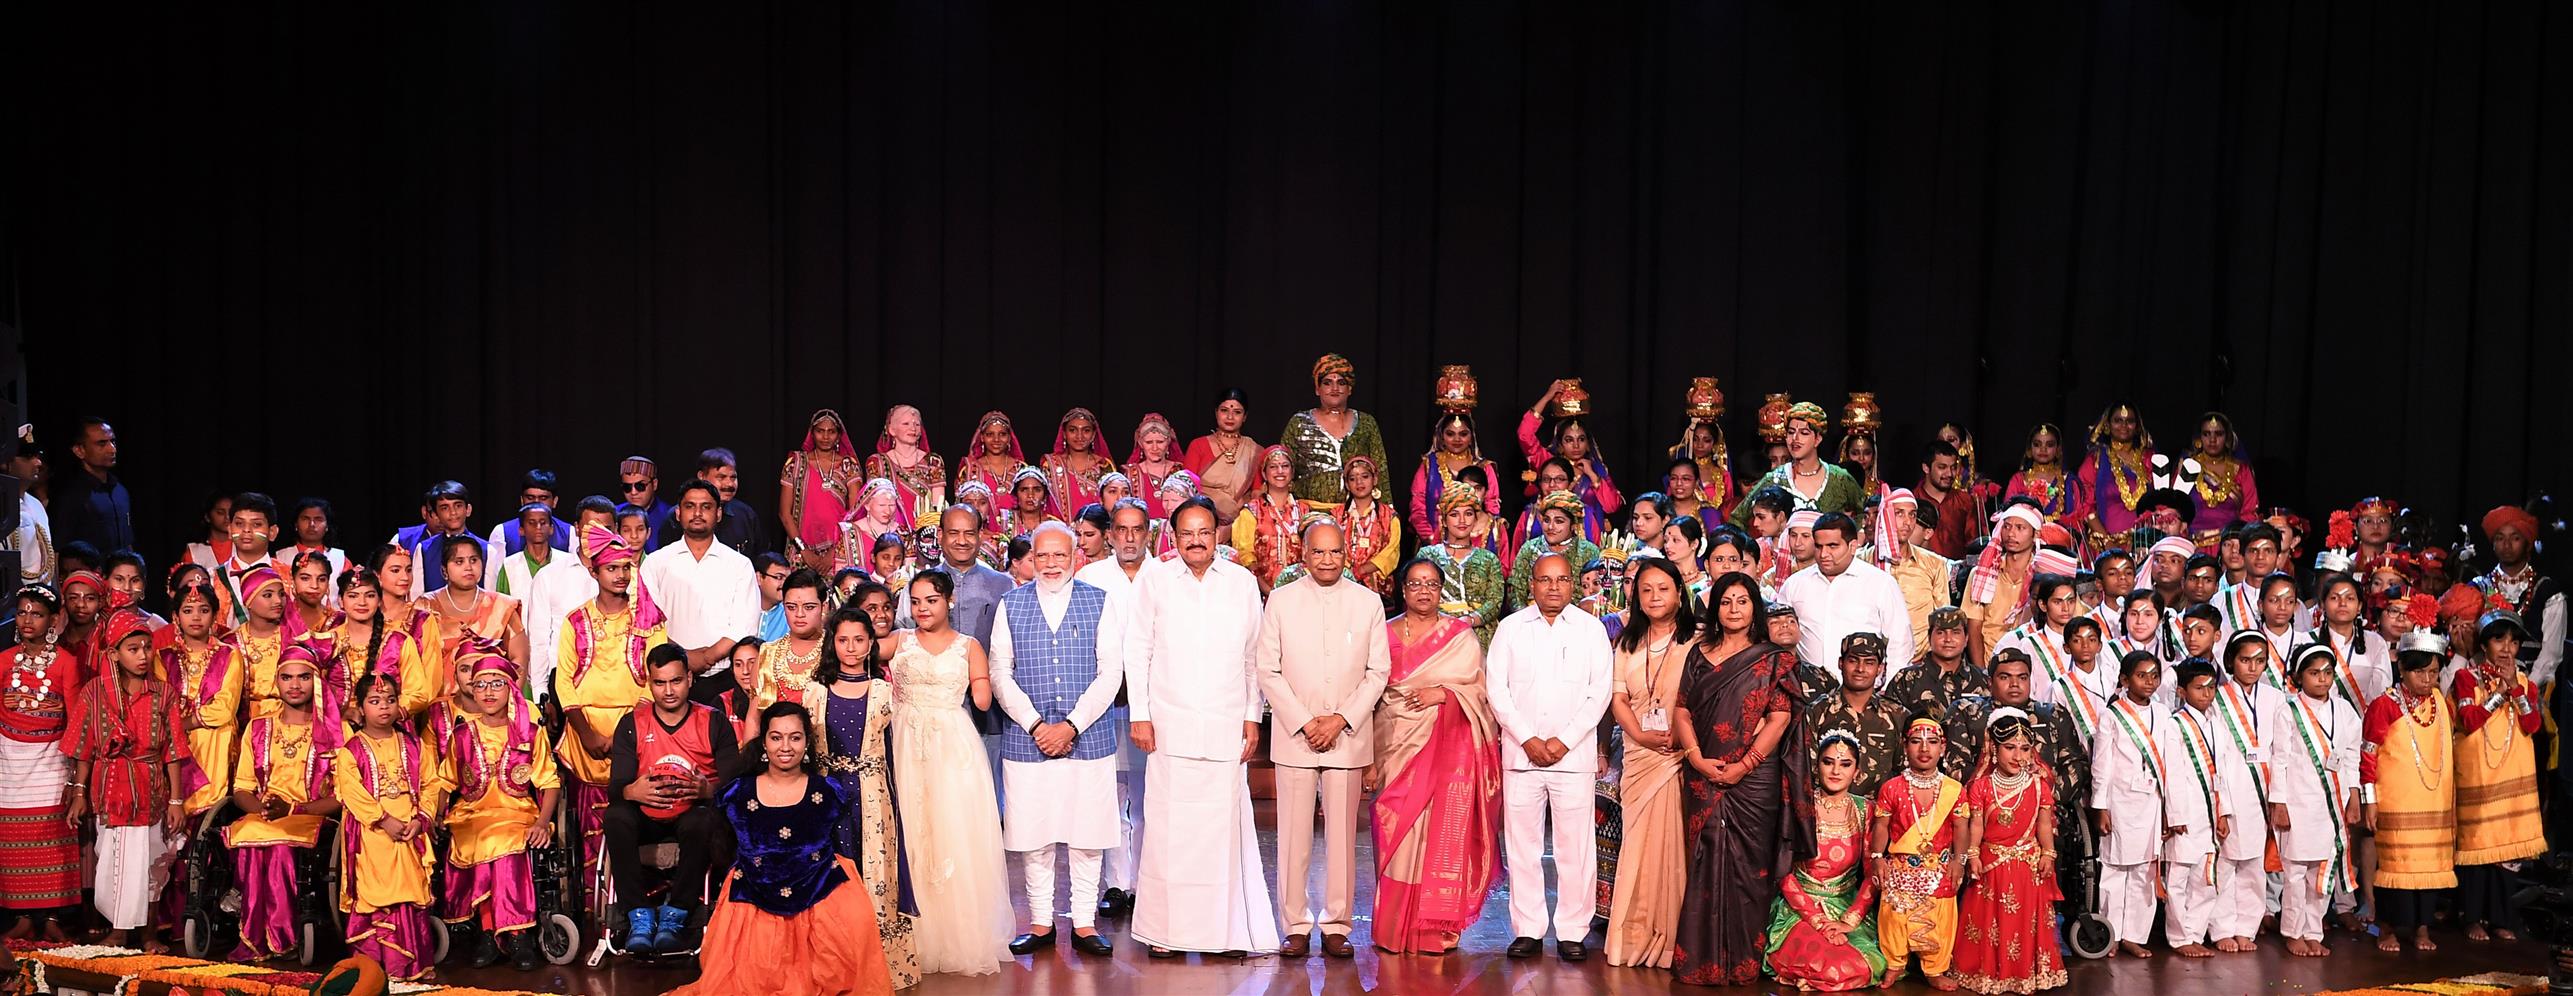 The President, Shri Ram Nath Kovind, the Vice President, Shri M. Venkaiah Naidu, the Prime Minister, Shri Narendra Modi and the Union Minister for Social Justice and Empowerment, Shri Thaawar Chand Gehlot at the Cultural Event “Divya Kala Shakti : Witnessing Ability in Disability”, organised by the DEPwD, Ministry of Social Justice & Empowerment, in New Delhi on July 23, 2019.